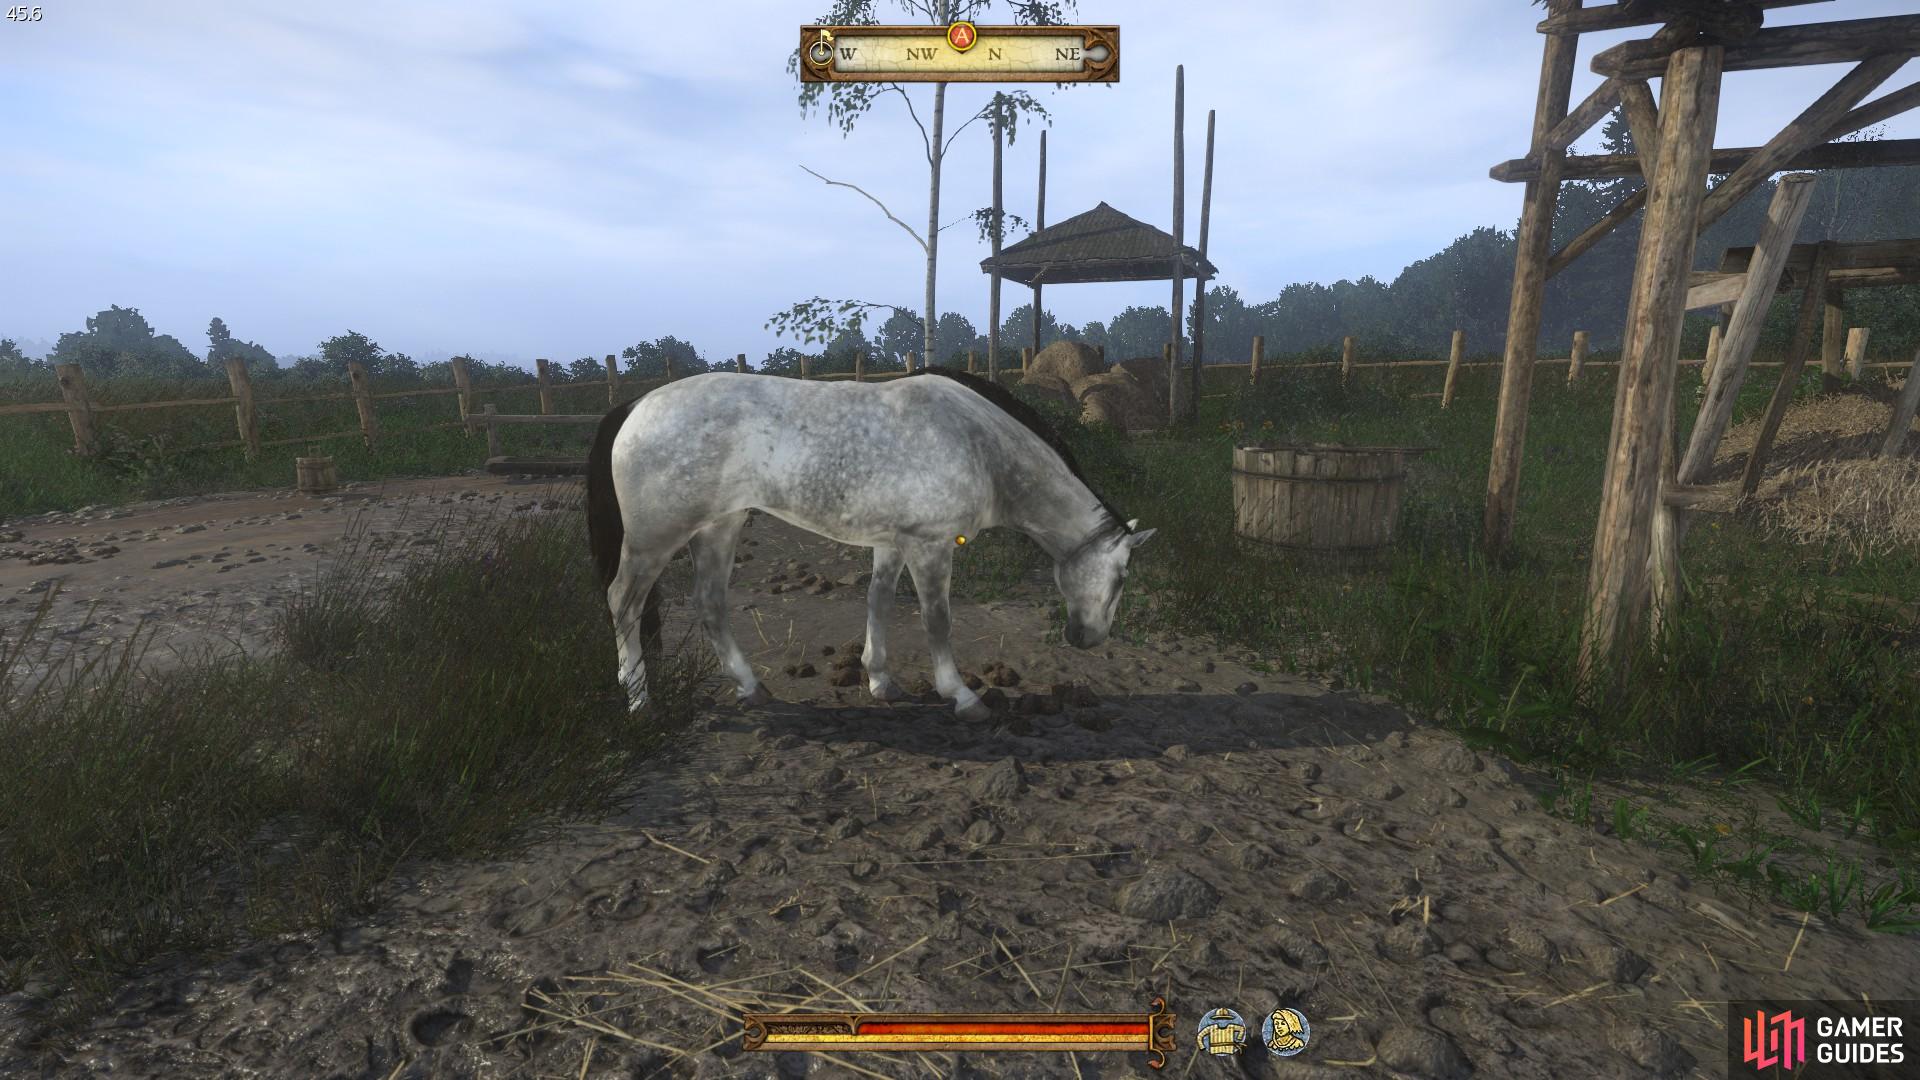 Once you have found a horse, be sure to inspect it to determine its suitability for Miller Woyzeck. Simply choose one with decent enough stats and certainly do not steal any named horses; you may want to buy one later in the game.